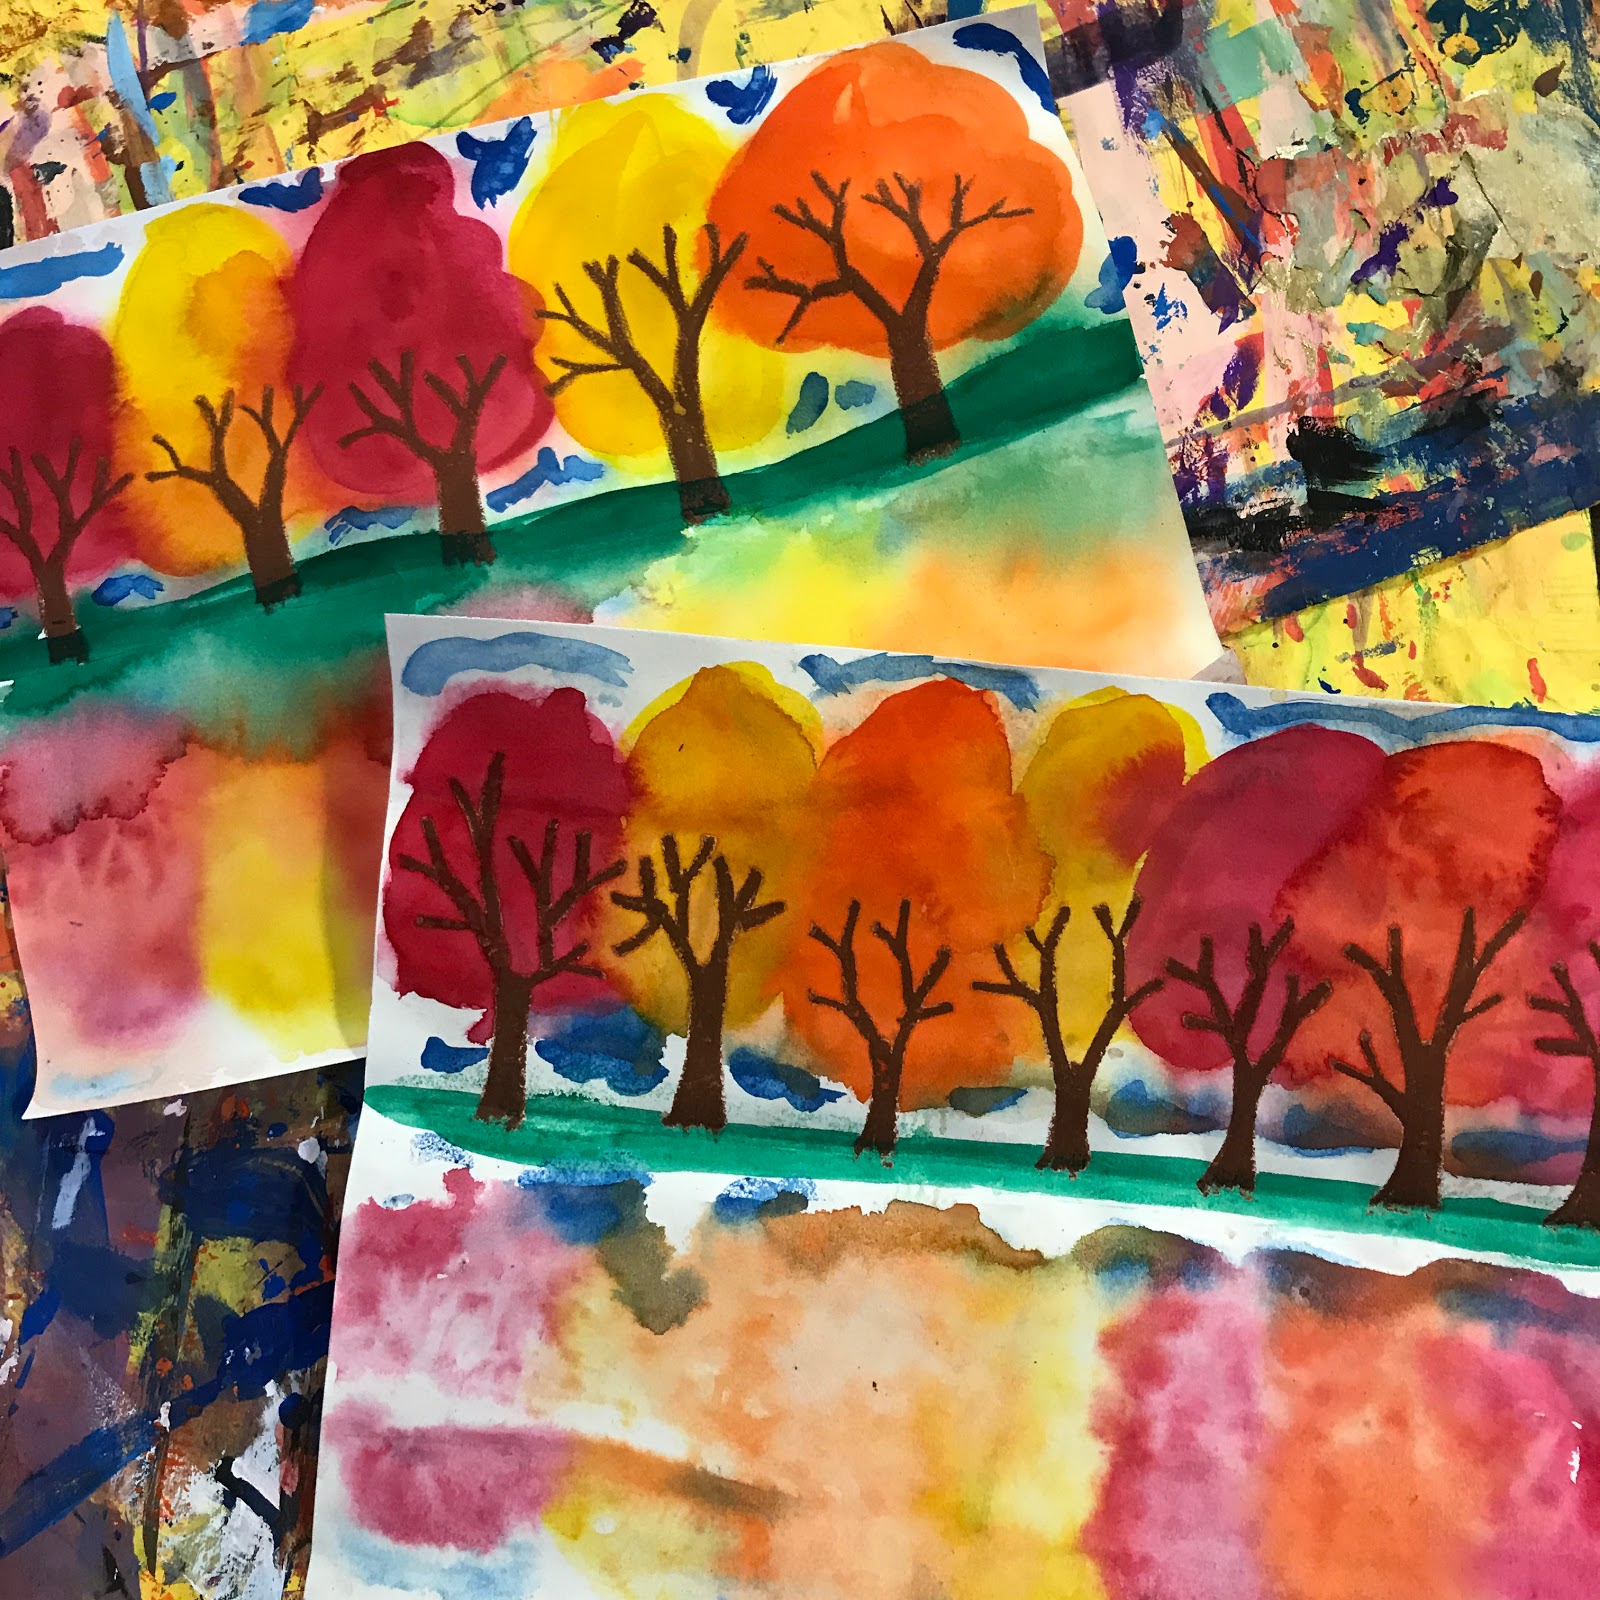 Fall Art Projects For Second Graders